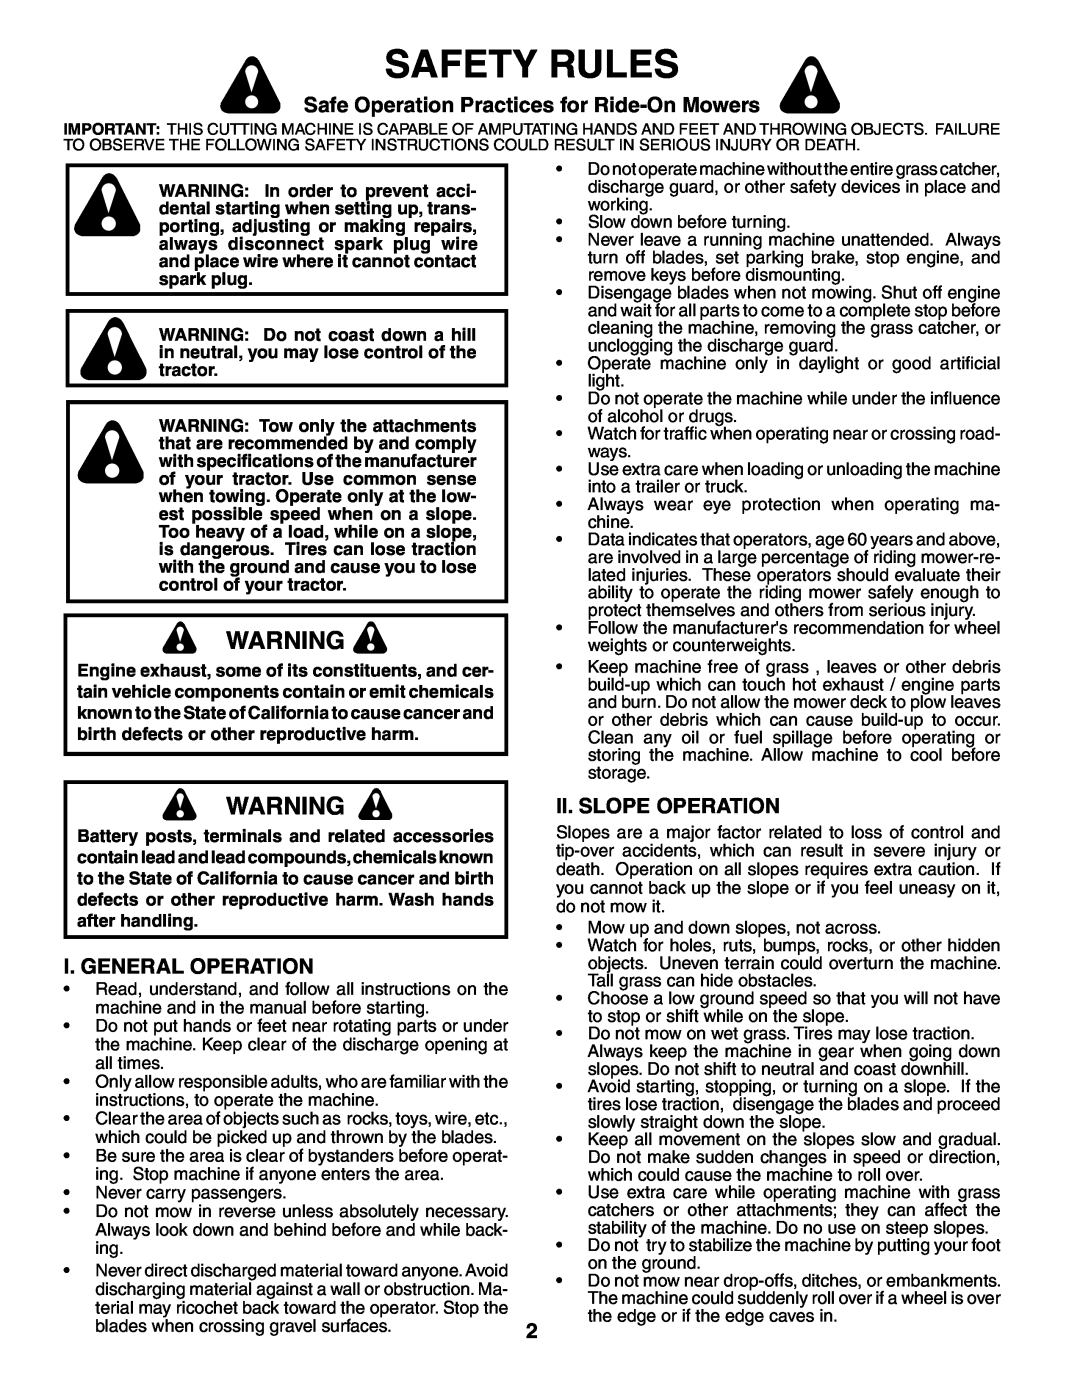 Poulan PD17542LT Safety Rules, Safe Operation Practices for Ride-On Mowers, I. General Operation, Ii. Slope Operation 